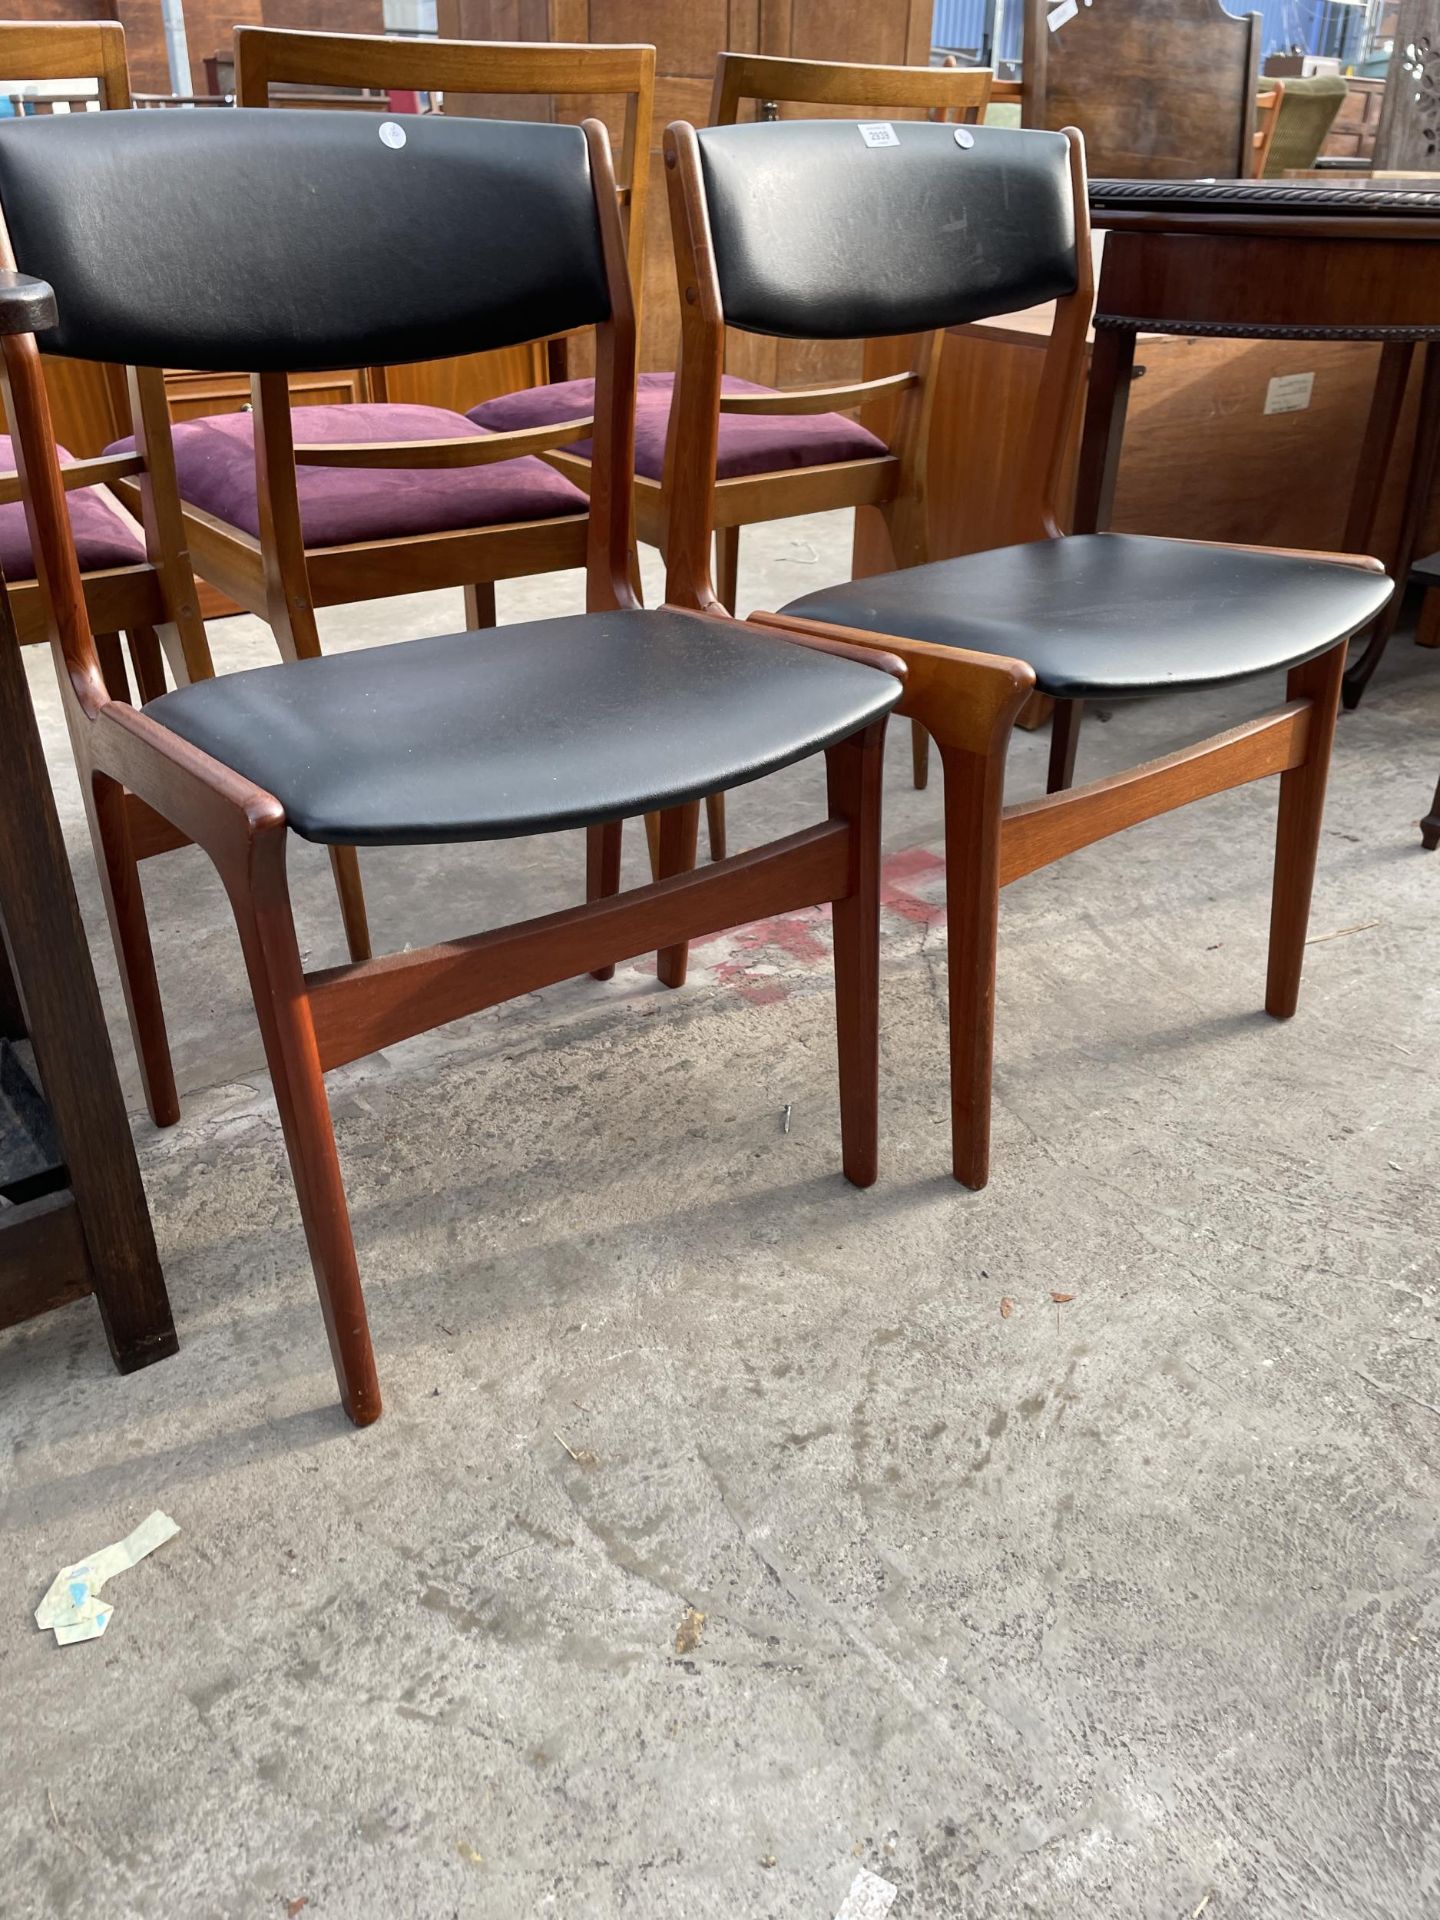 A PAIR OF DYRLUND (DENMARK) RETRO TEAK DINING CHAIRS WITH BLACK FAUX LEATHER SEATS AND BACKS - Image 2 of 2